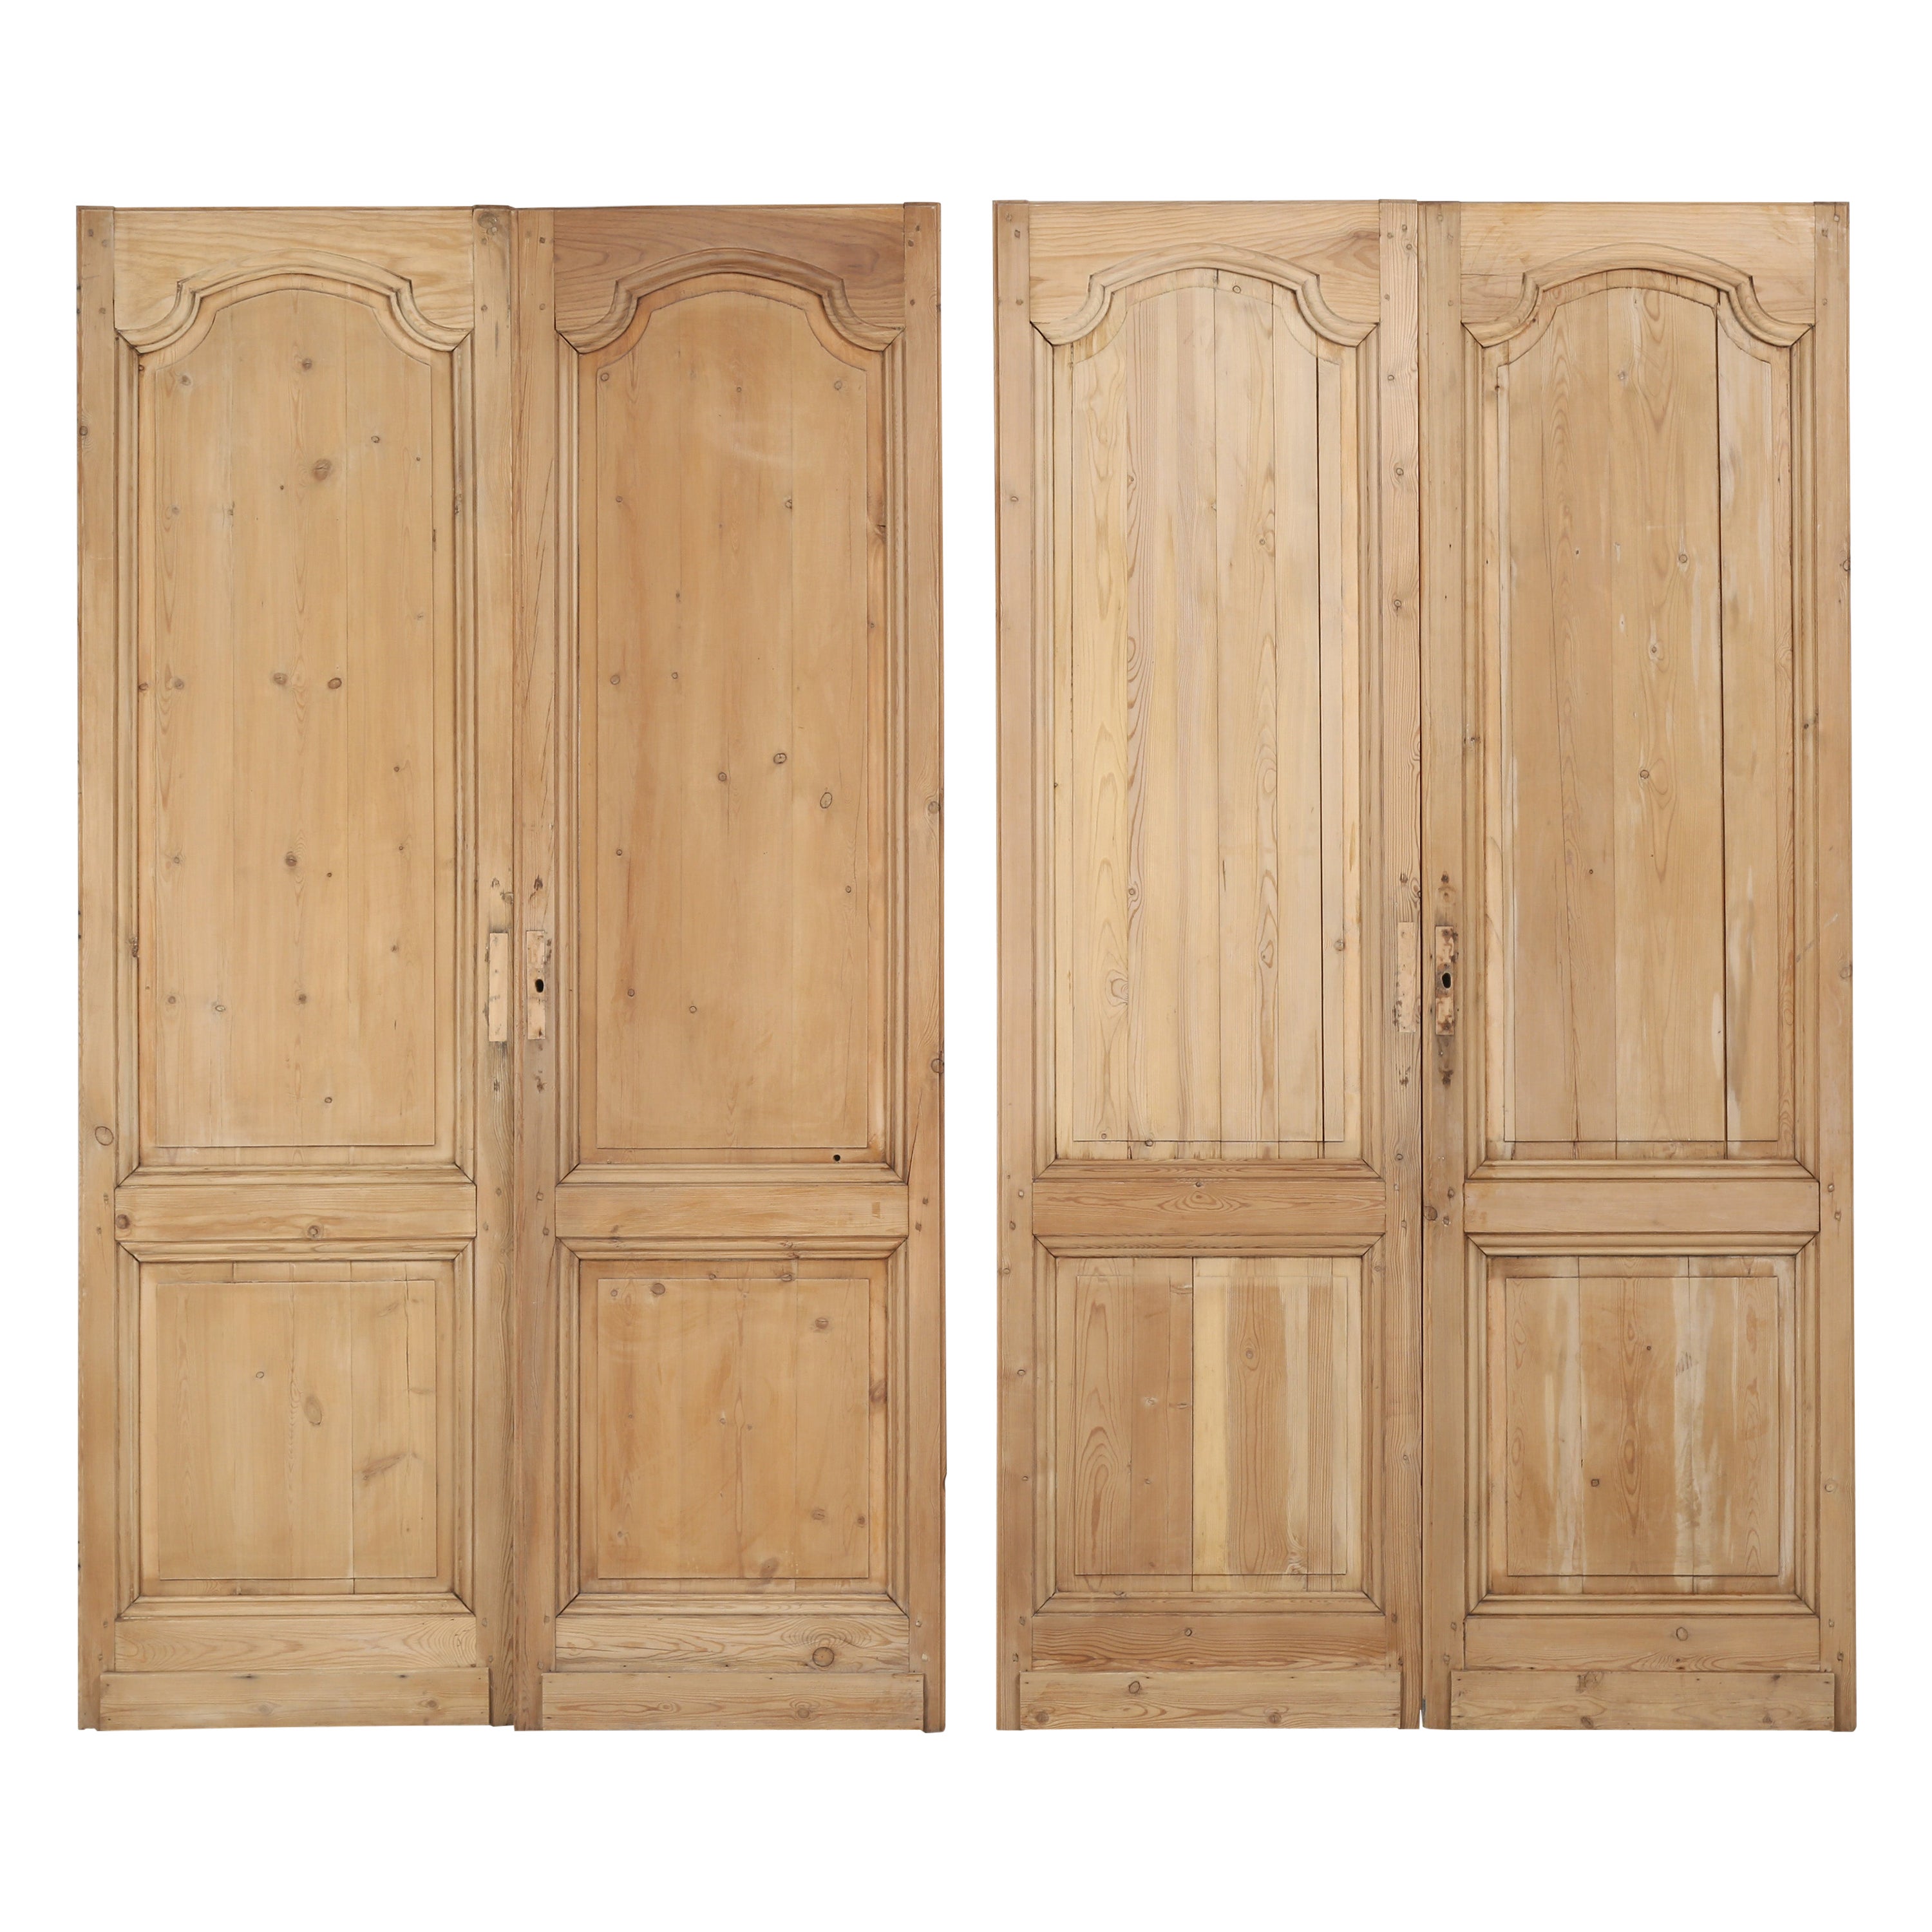 Antique '2' Pairs of French Doors From Toulouse Region Stripped to Raw Wood